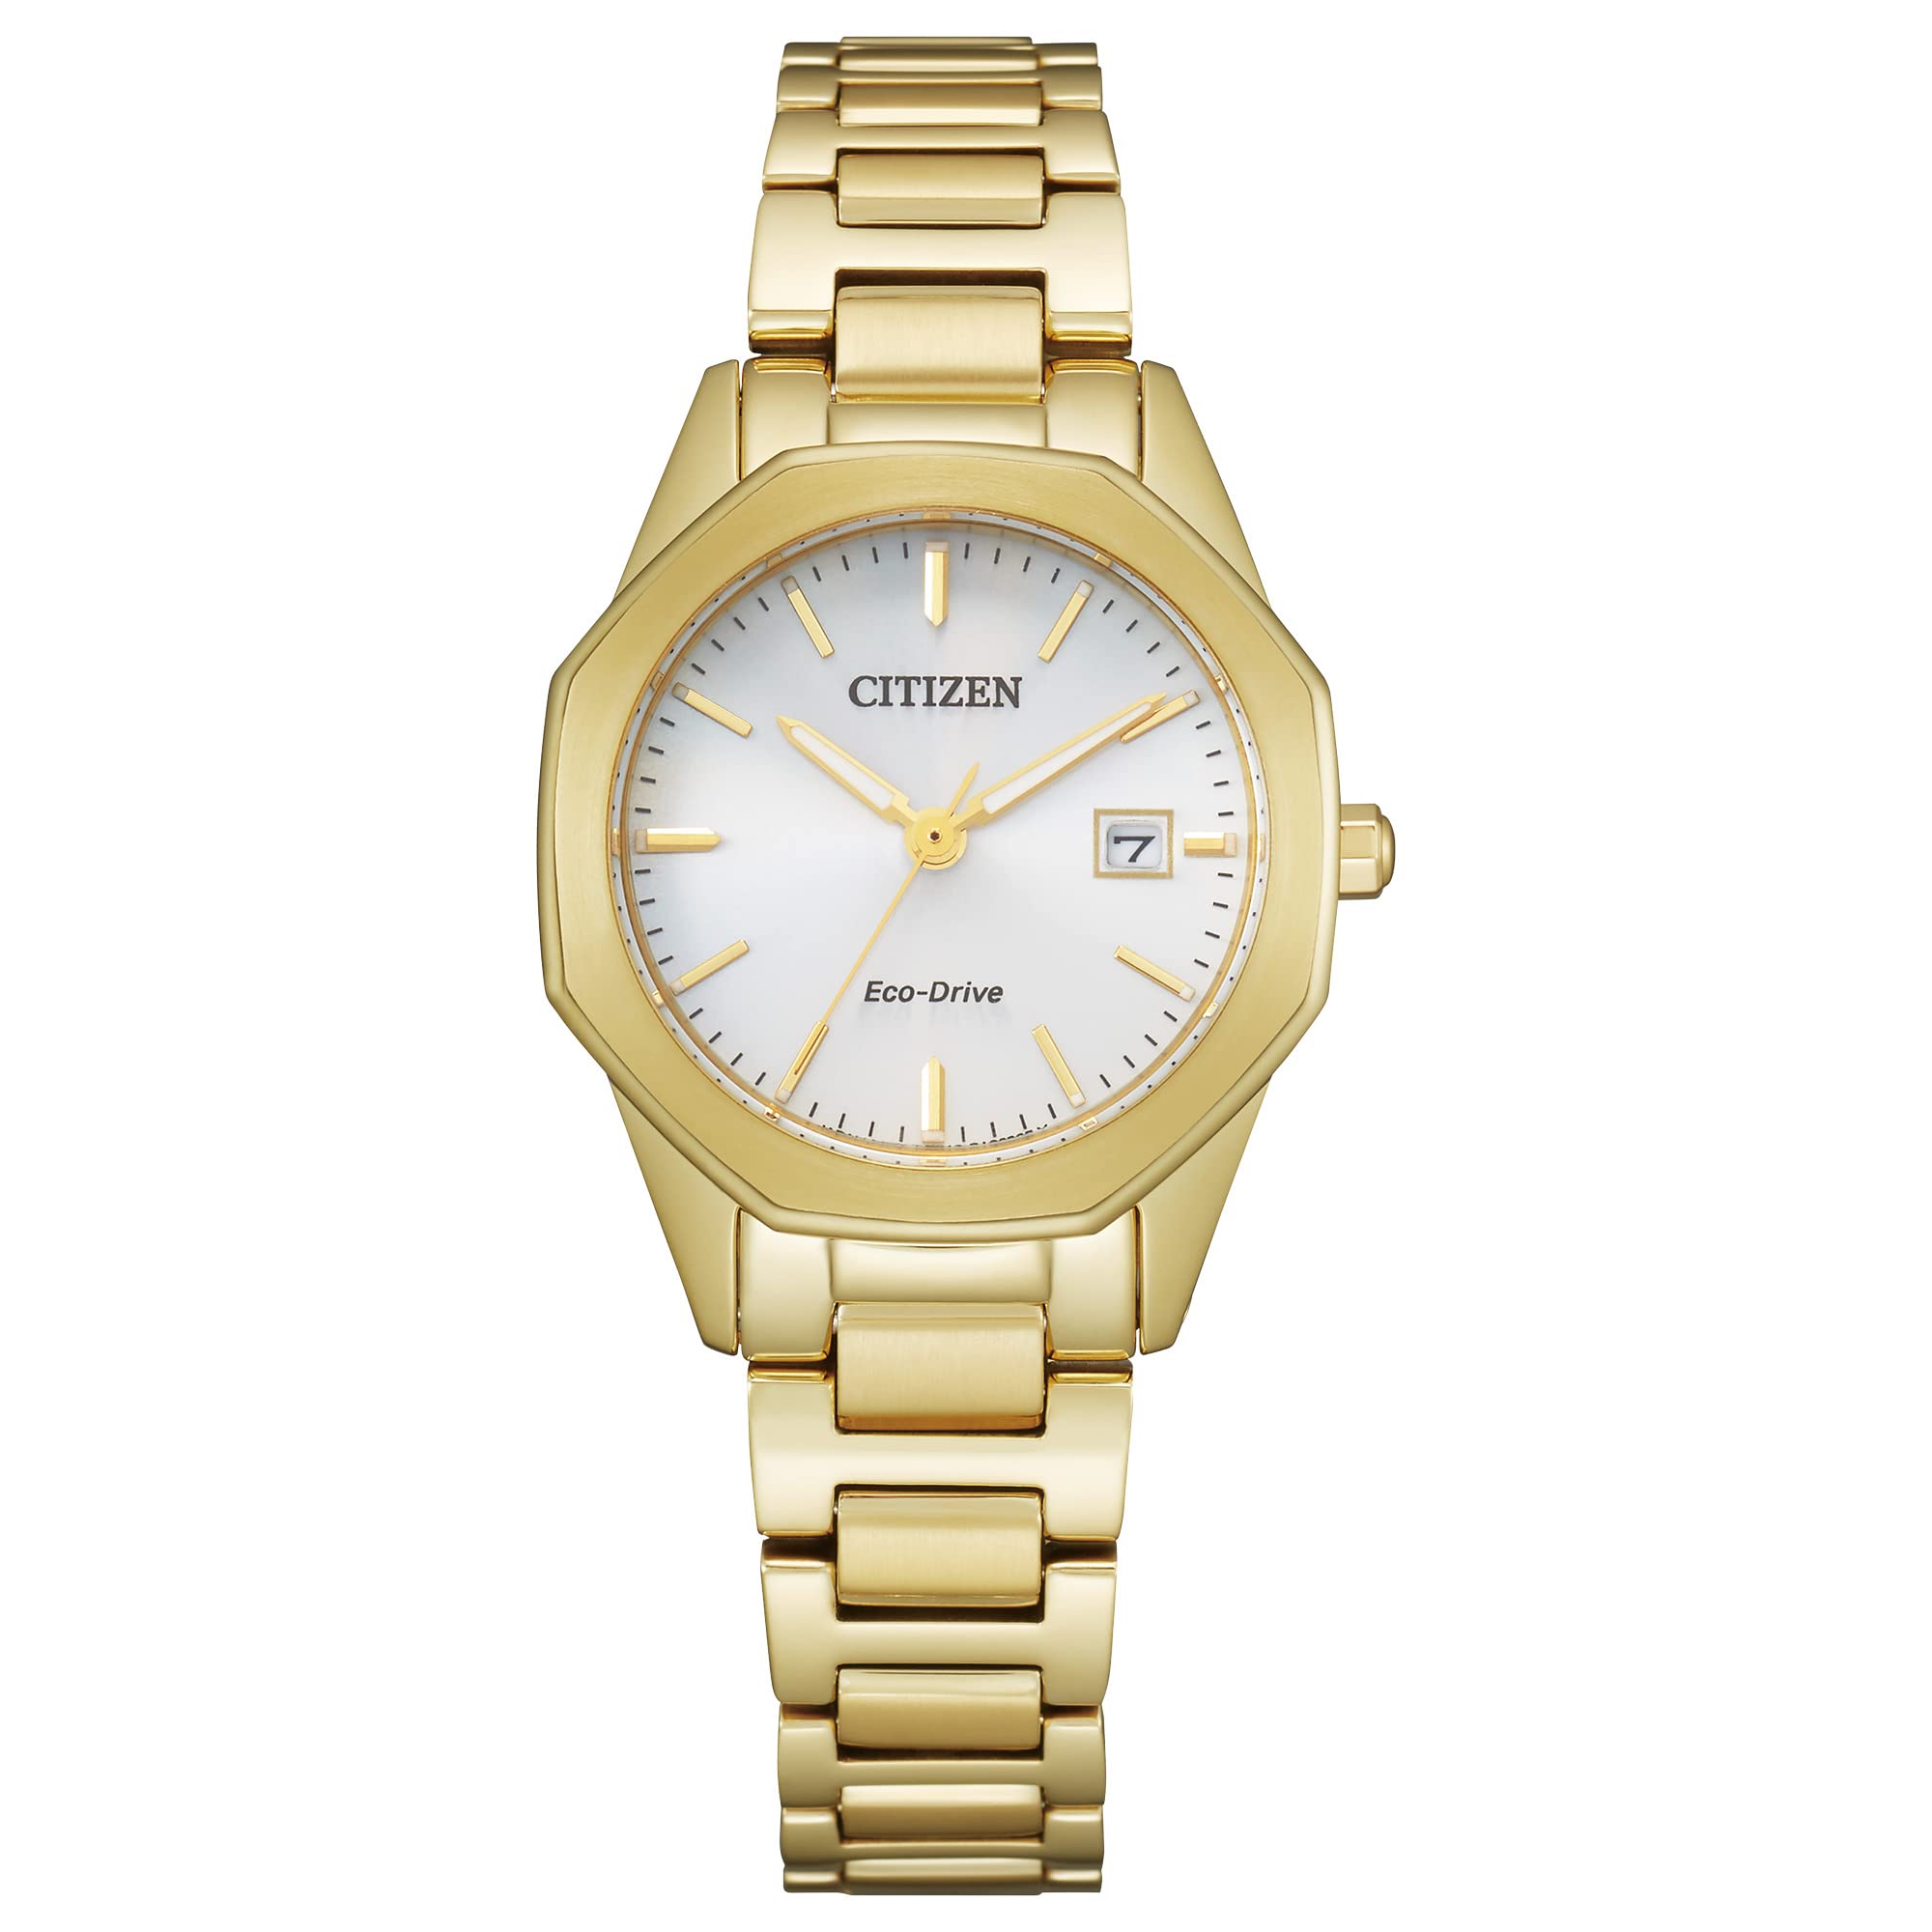 Citizen Ladies' Classic Corso Watch in Gold-Tone Stainless Steel, White Dial (Model: EW2582-59A)